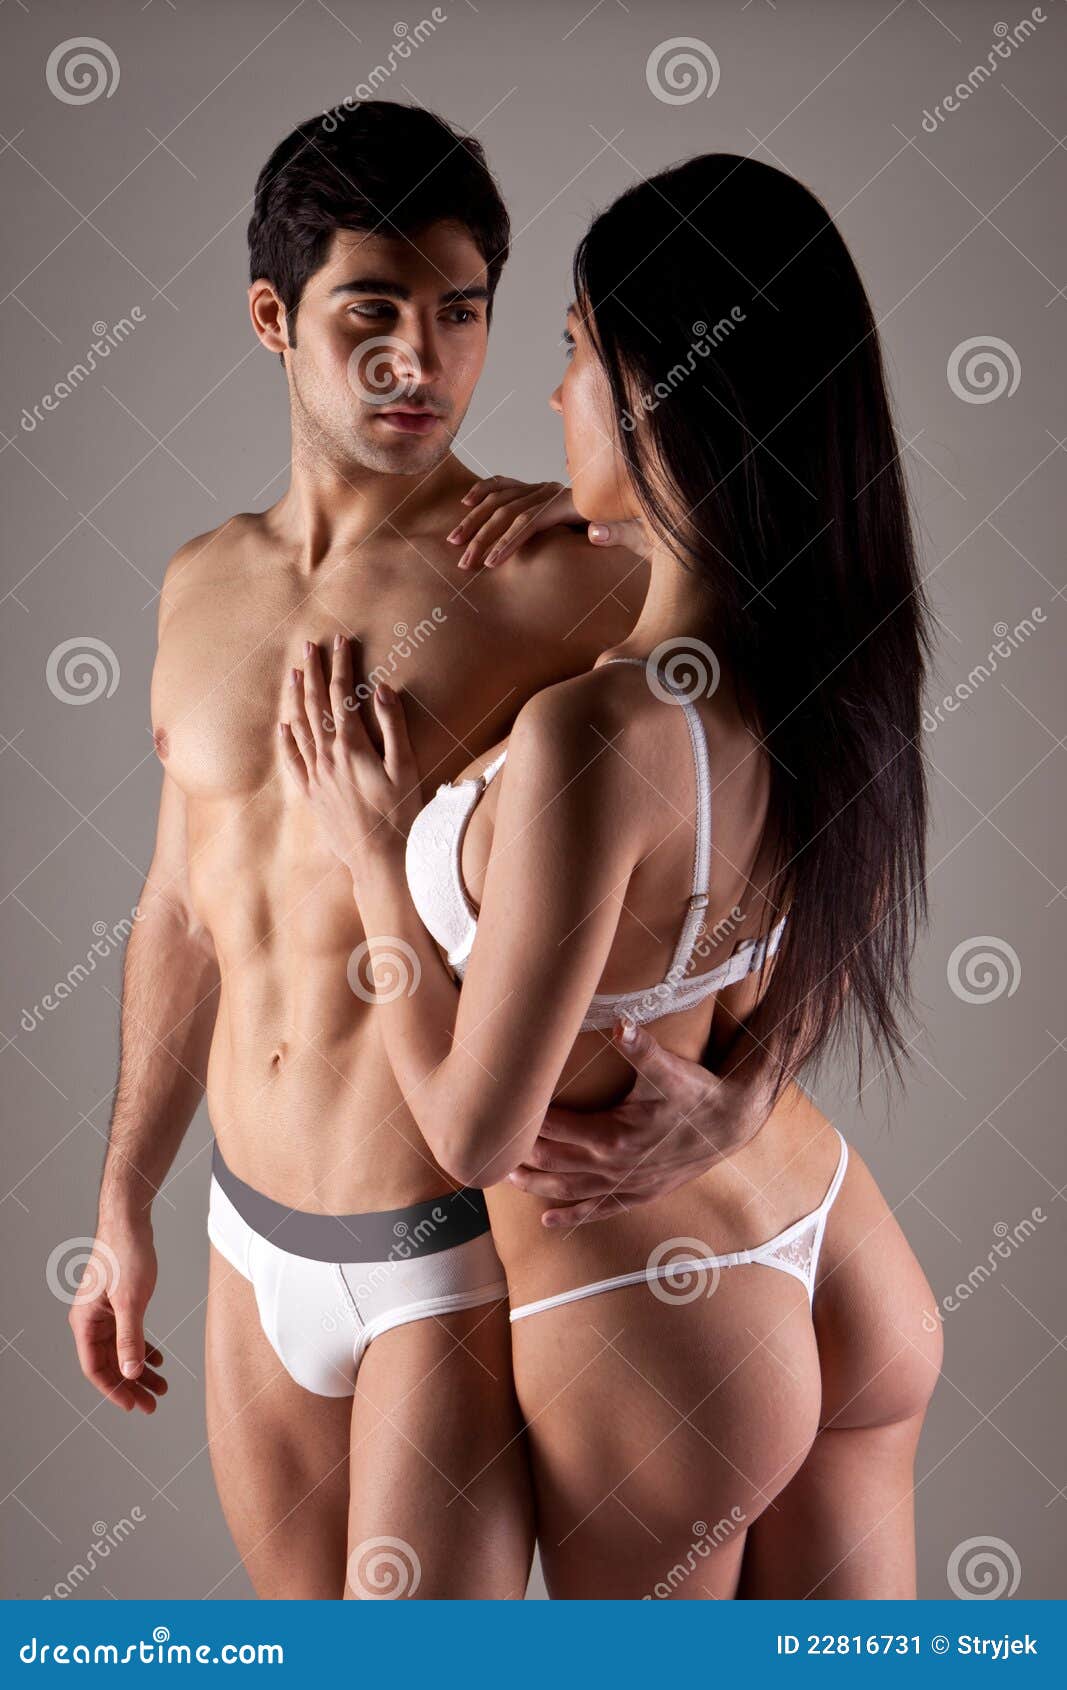 Passionate Couple in Underwear Stock Image - Image of feelings